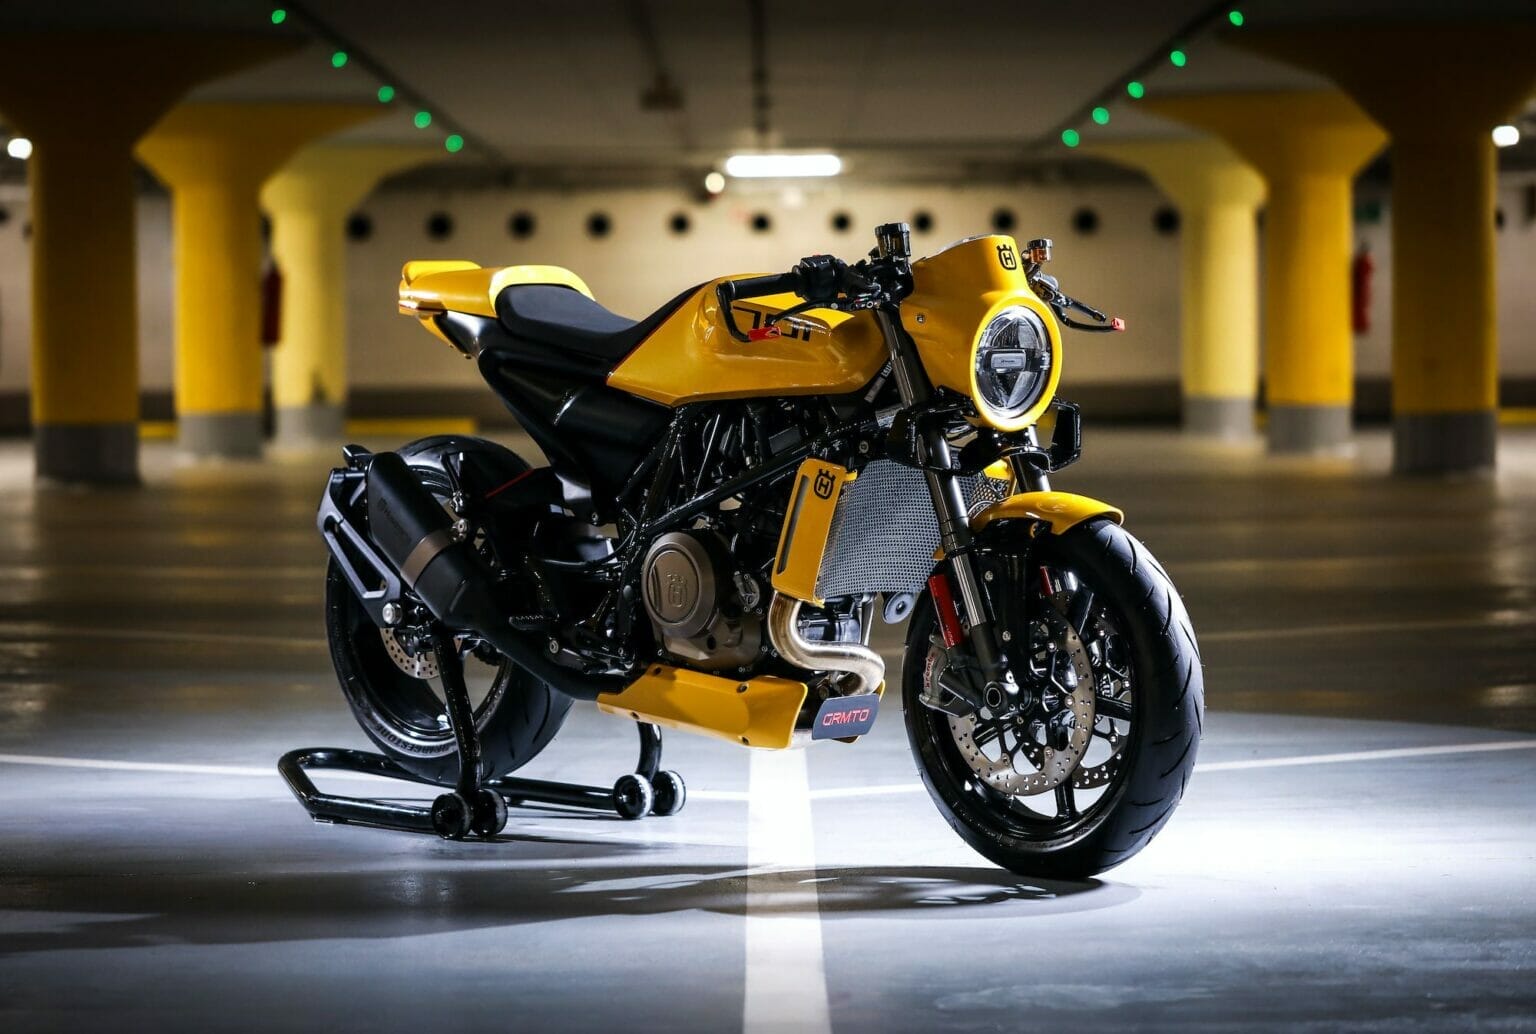 GRMoto Yellow Arrow - Vitpilen discreetly upgraded
- also in the MOTORCYCLES.NEWS APP